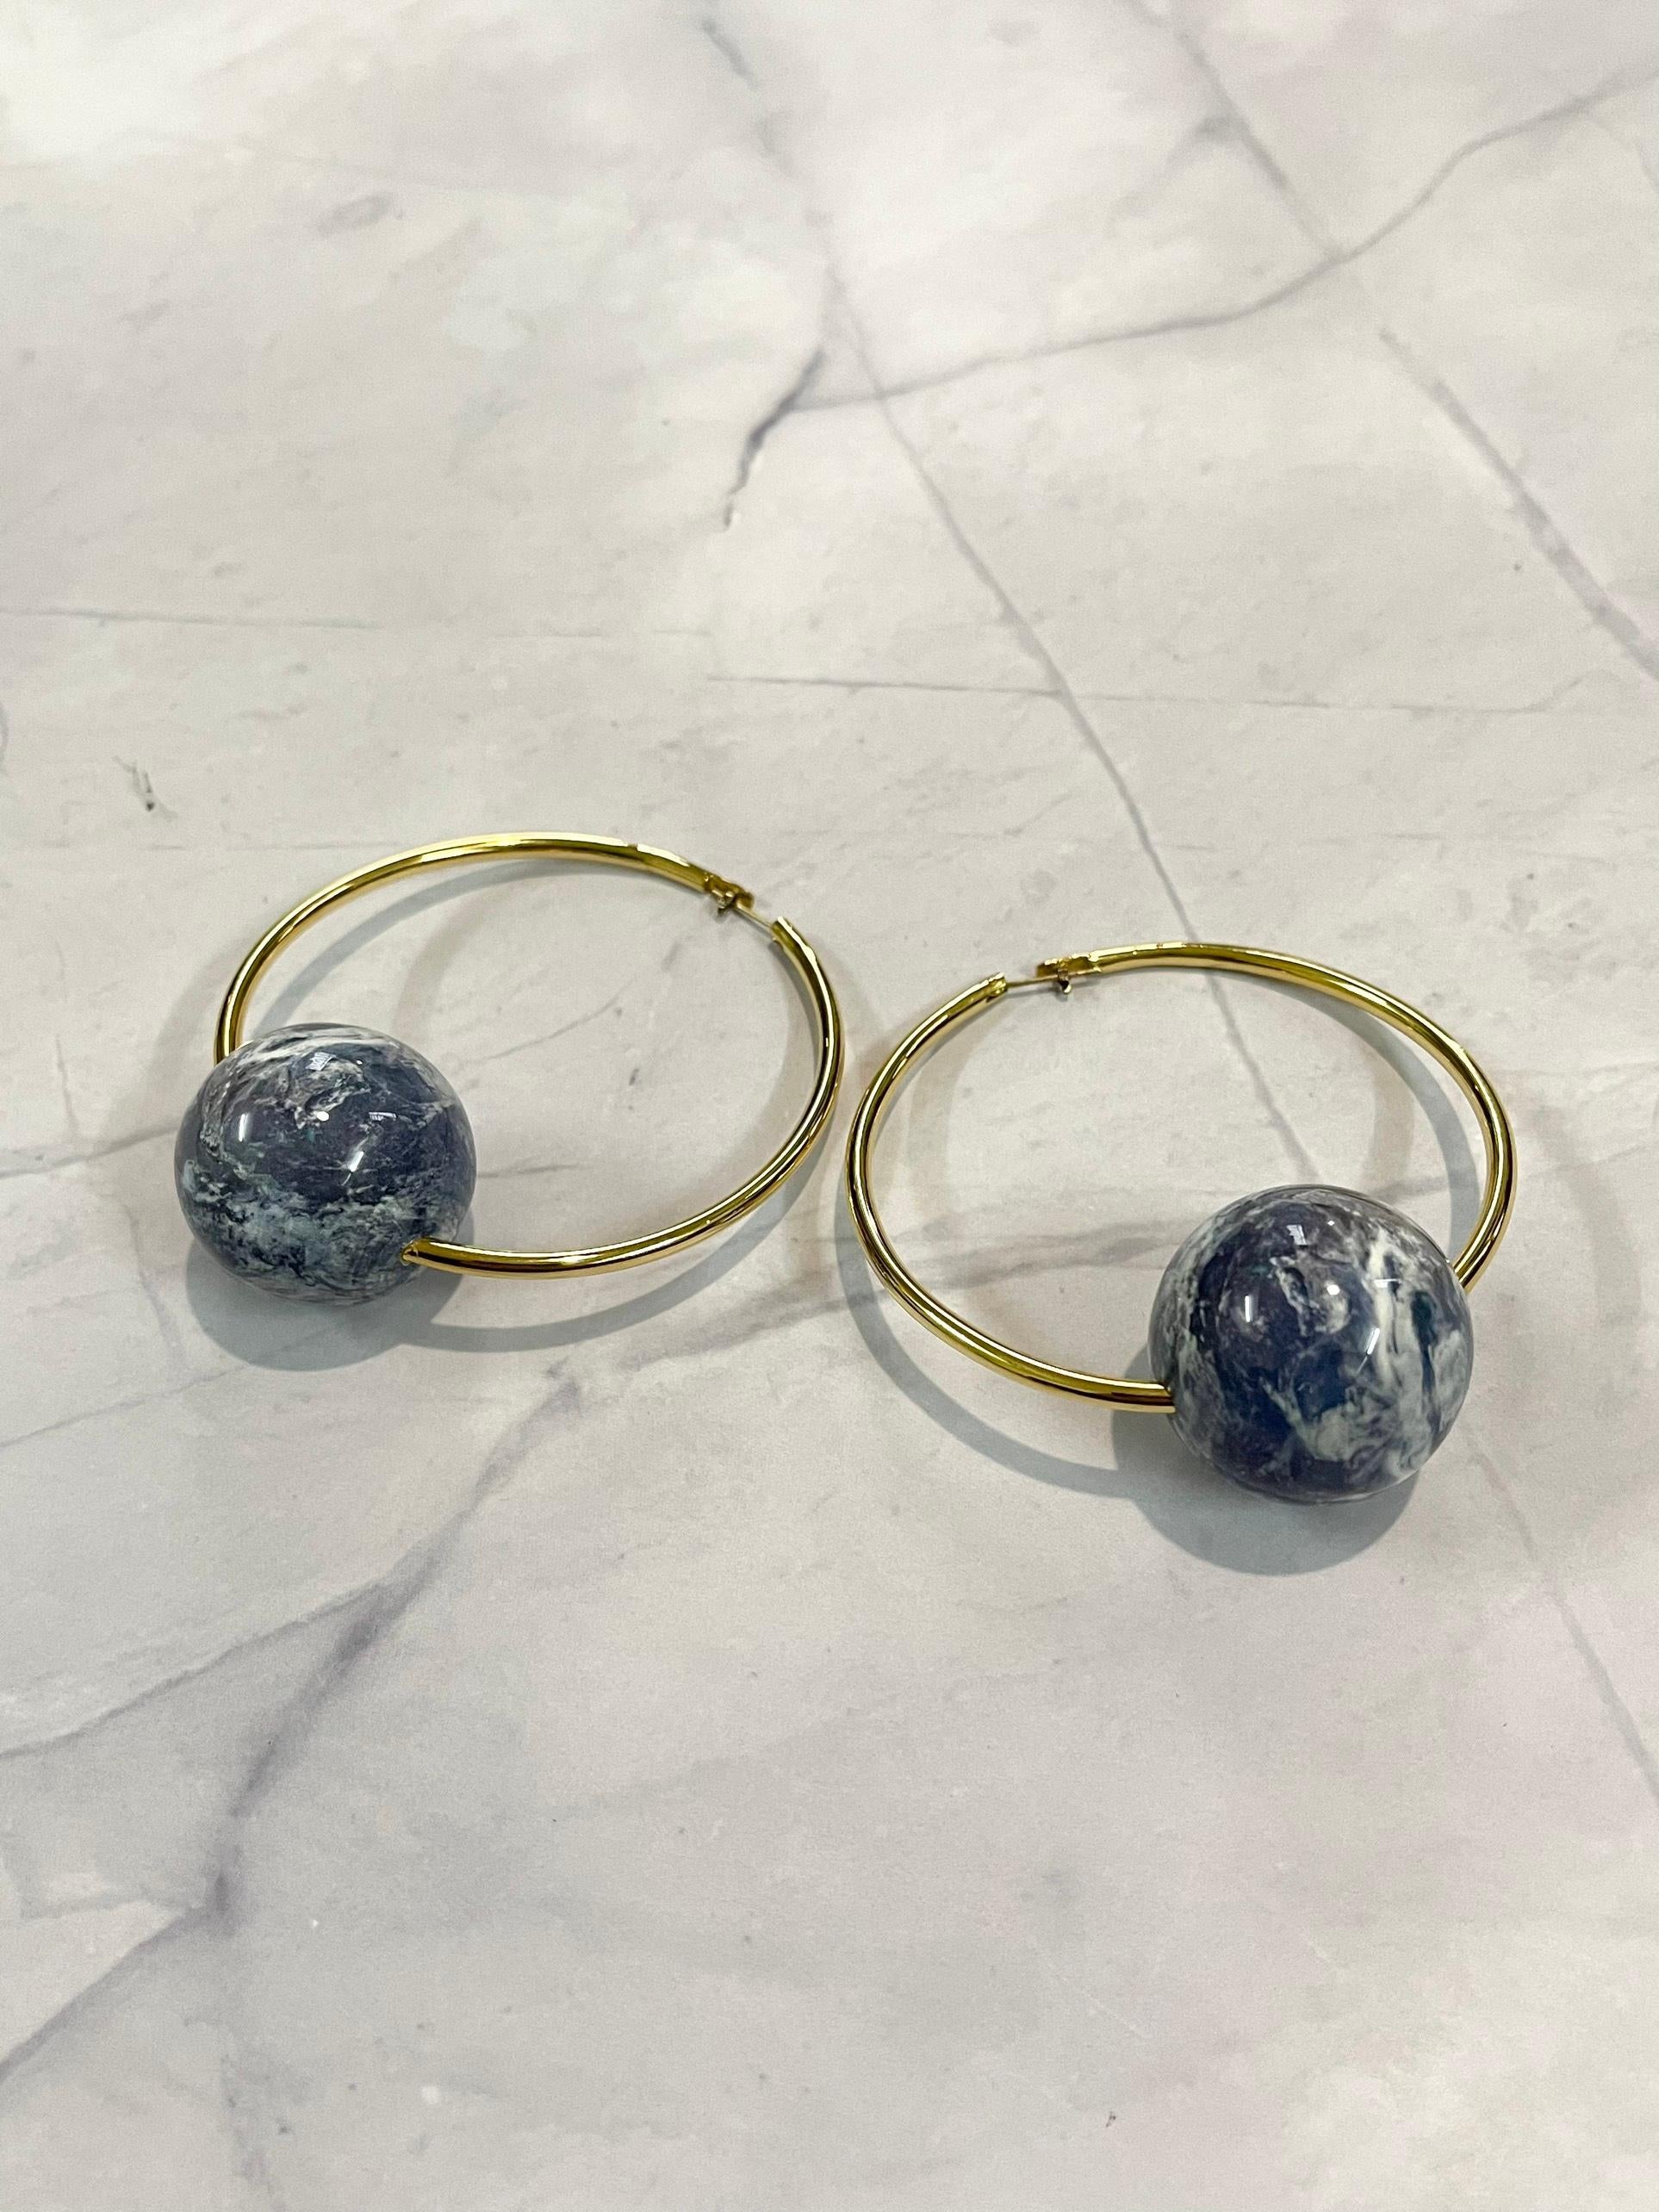 Undercover Earth Hoop Earrings In Excellent Condition For Sale In Seattle, WA